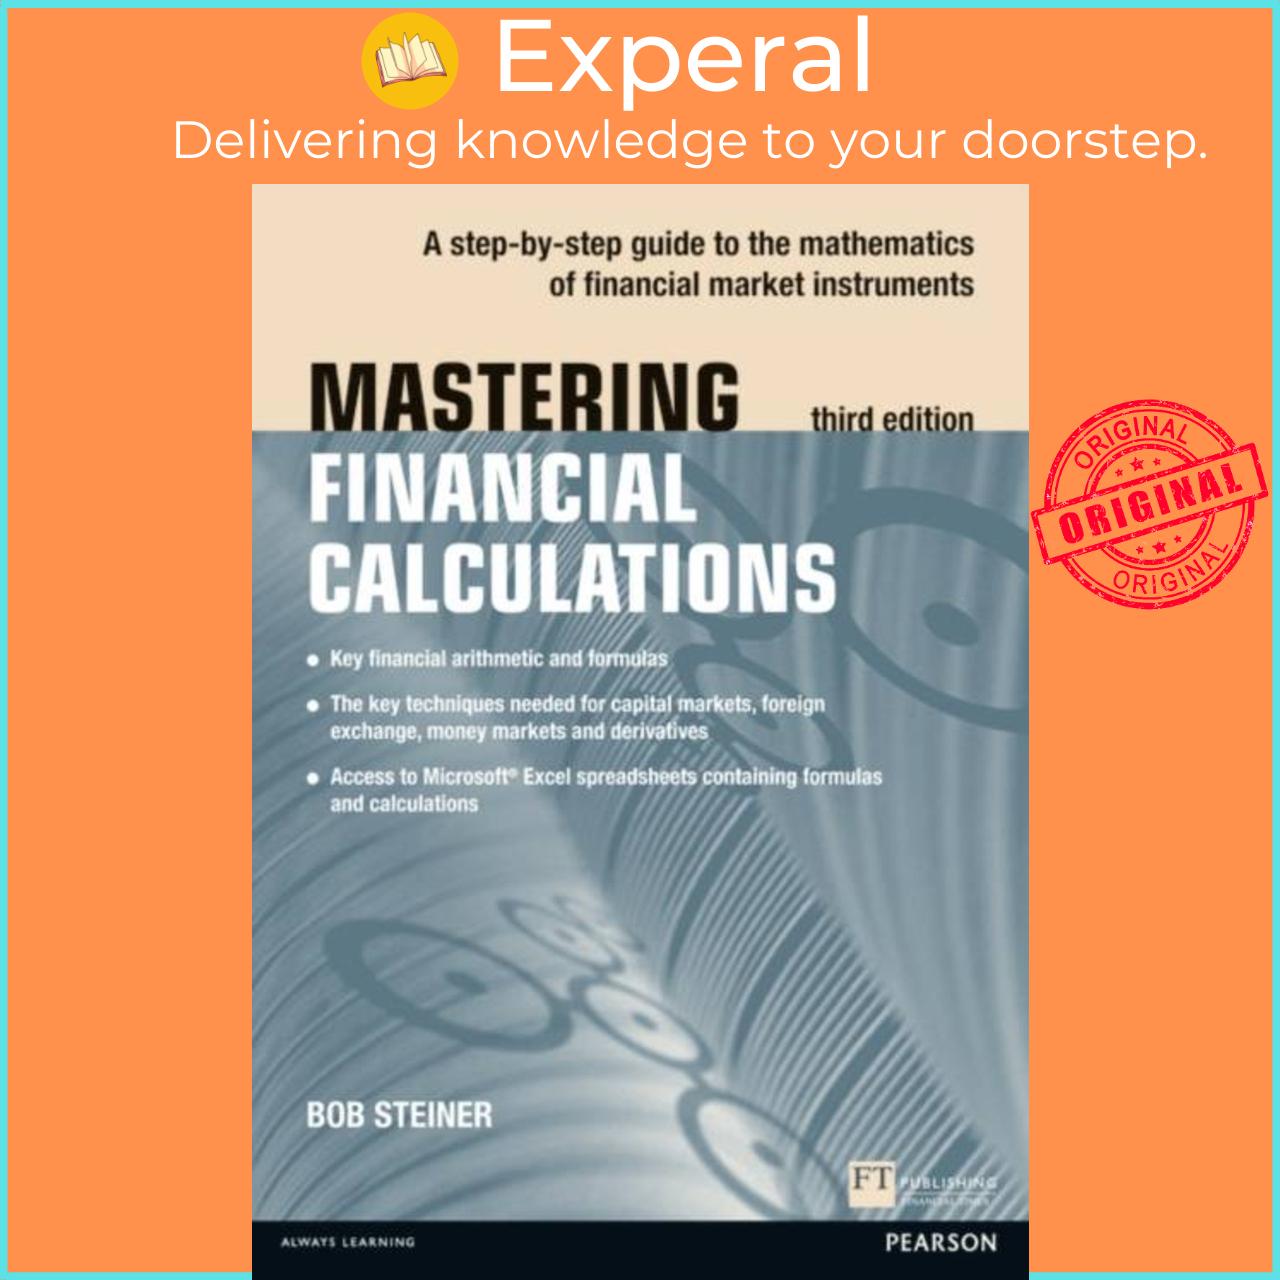 Sách - Mastering Financial Calculations - A step-by-step guide to the mathematics by Bob Steiner (UK edition, paperback)